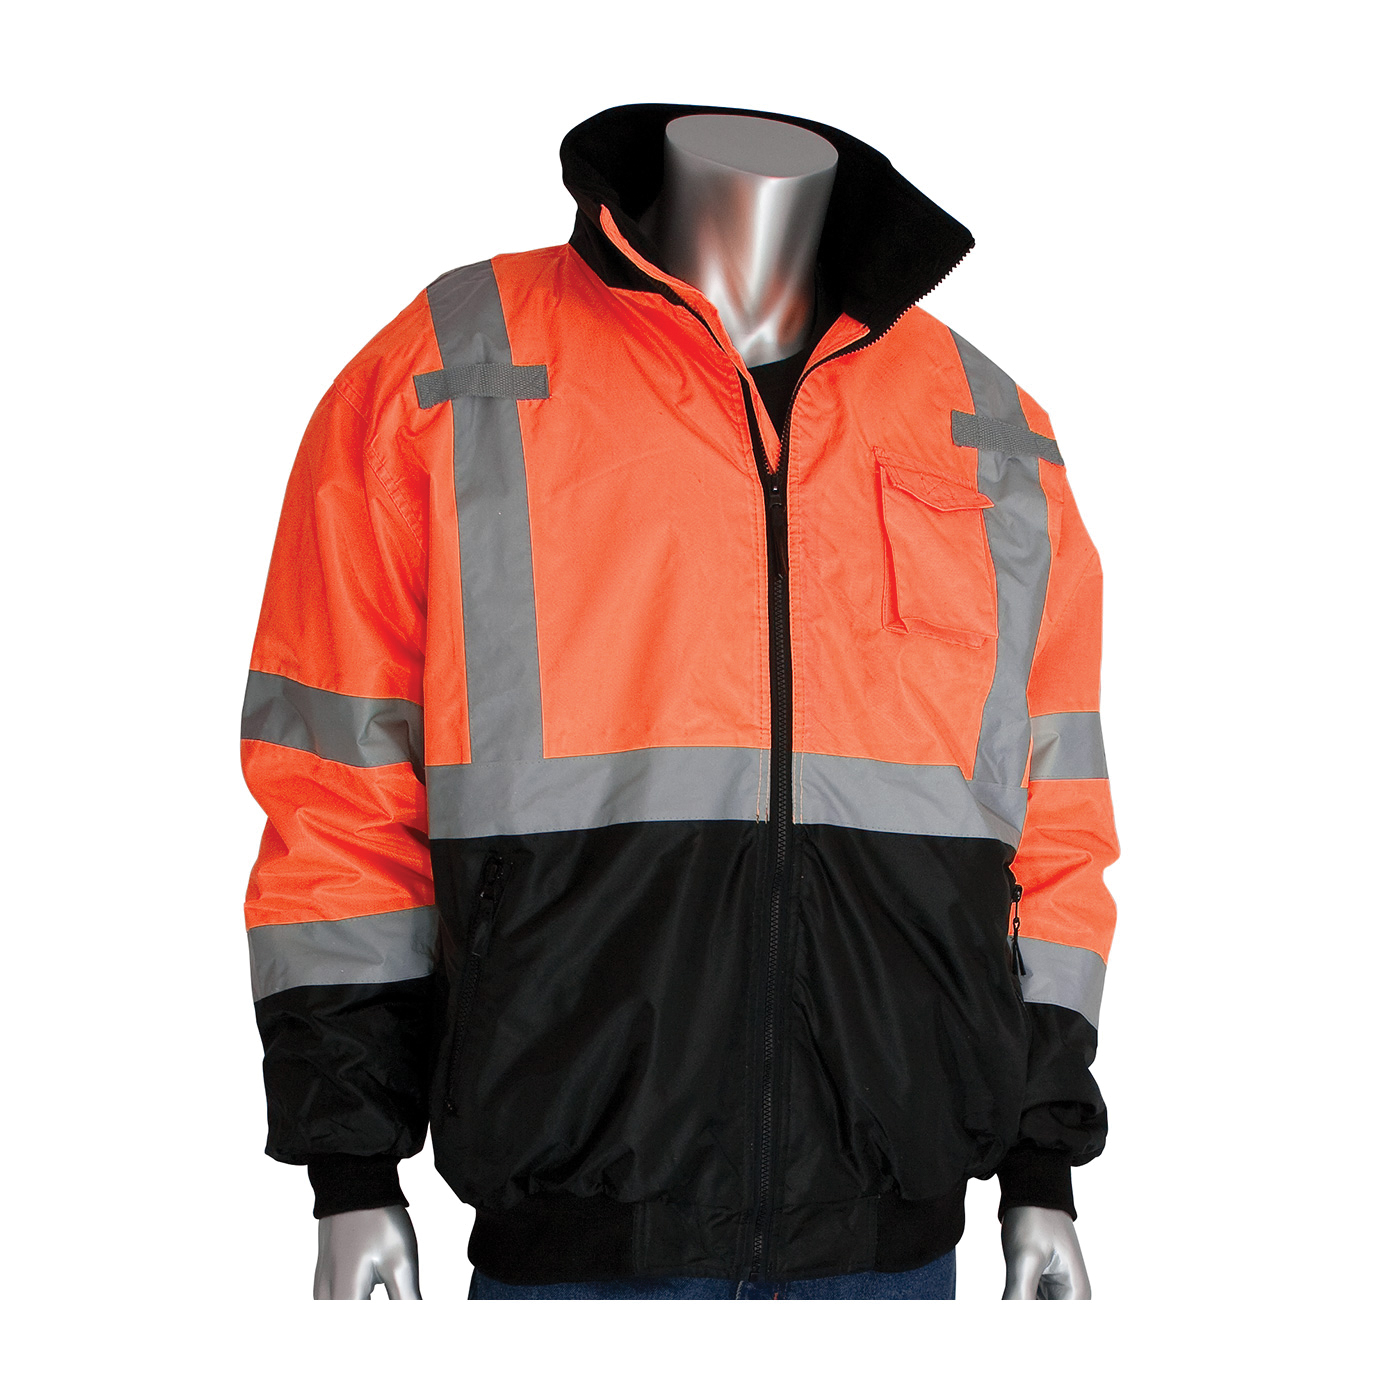 PIP® 333-1766-OR/L Bomber Jacket With Zip-Out Fleece Liner, Hi-Viz Orange, Polyester, 56 in Chest, Resists: Water, Specifications Met: ANSI 107 Class 3 Type R